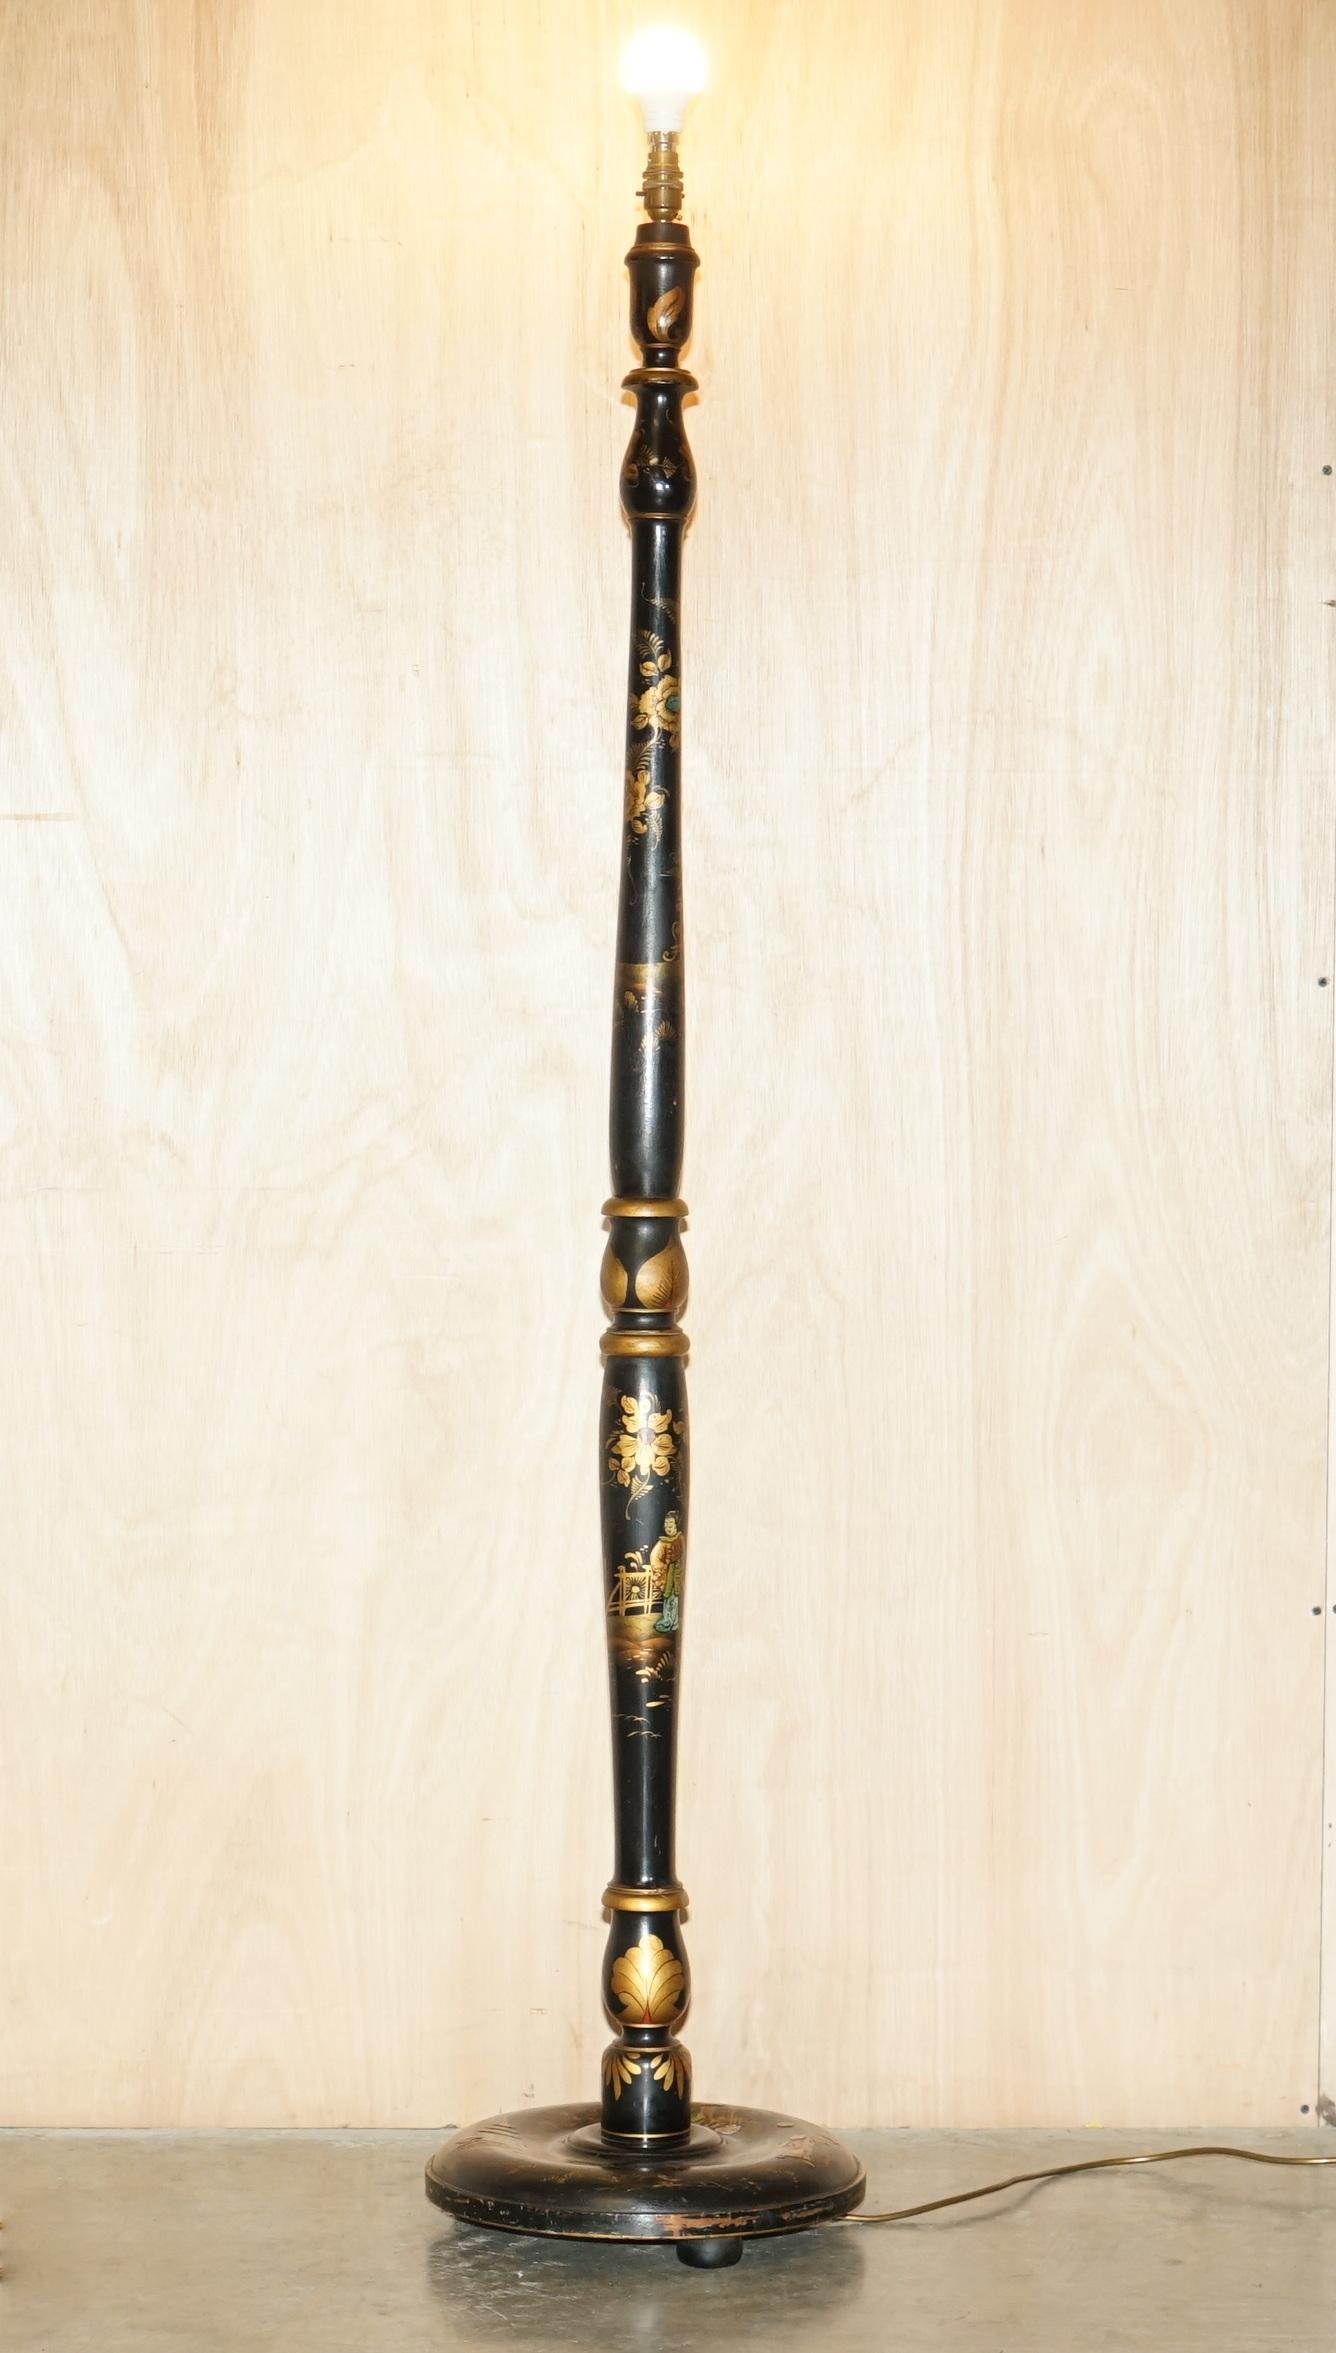 We are delighted to offer for sale this very rare hand painted and lacquered Chinese Export circa 1920's Chinoiserie floor standing lamp

The lamp has been fully rewired with new cable and plug, its in ready to go condition